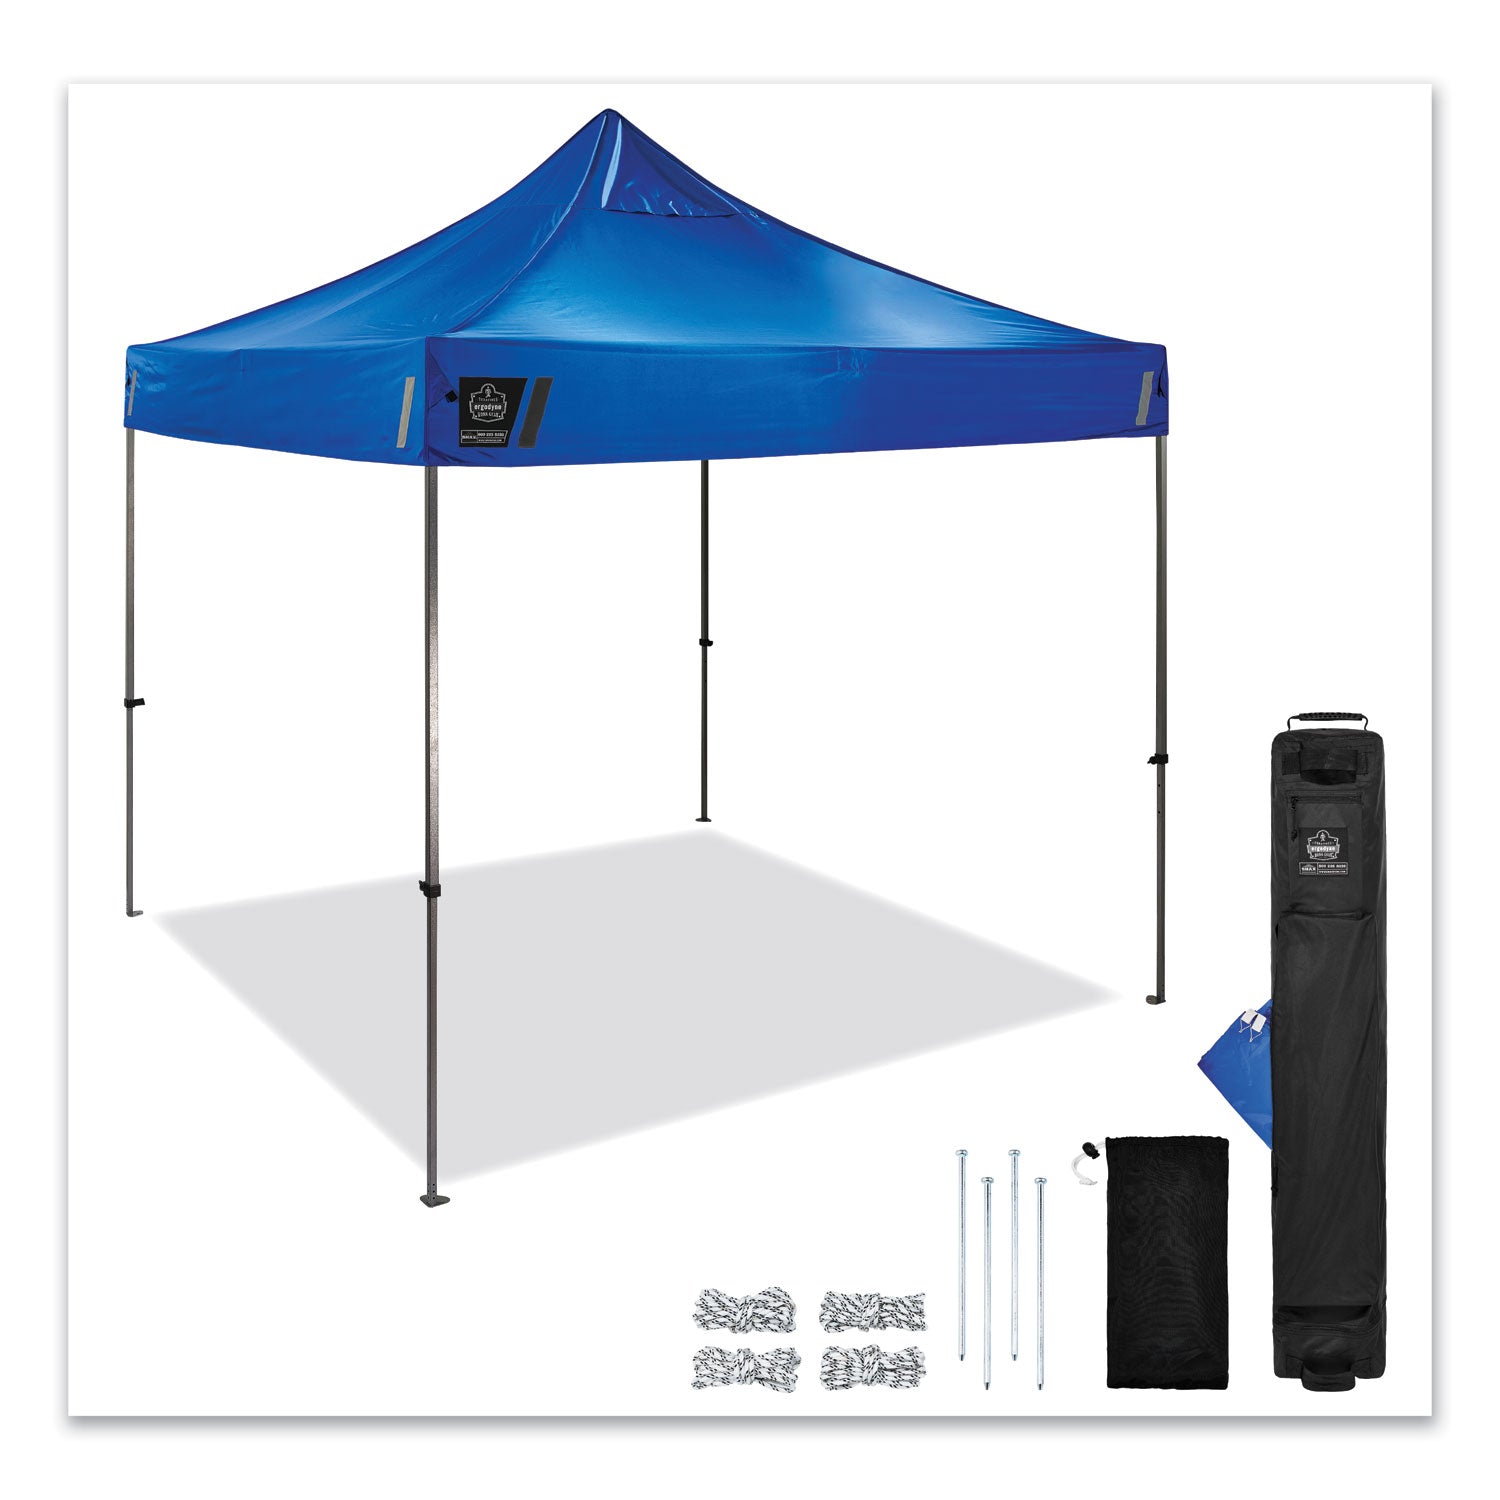 shax-6000-heavy-duty-pop-up-tent-single-skin-10-ft-x-10-ft-polyester-steel-blue-ships-in-1-3-business-days_ego12905 - 1